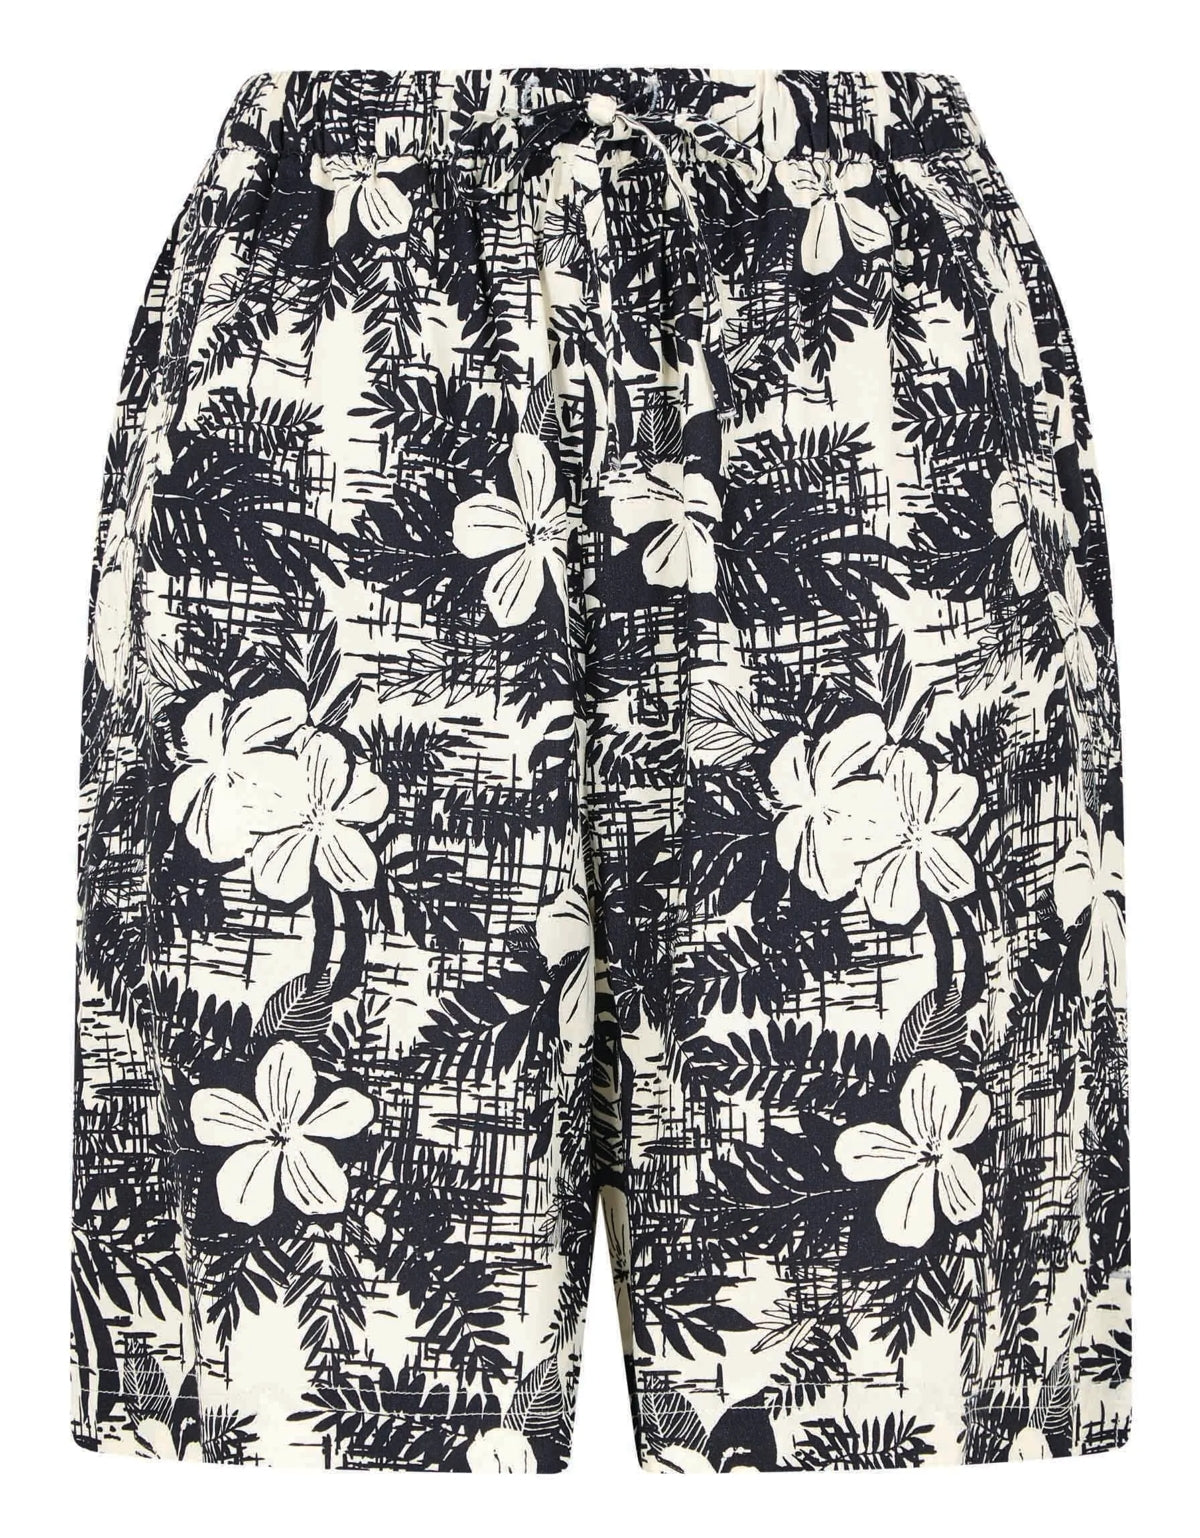 Women's Sundance viscose shorts from Weird Fish in Dark Denim Blue with a White floral print and hip pockets.